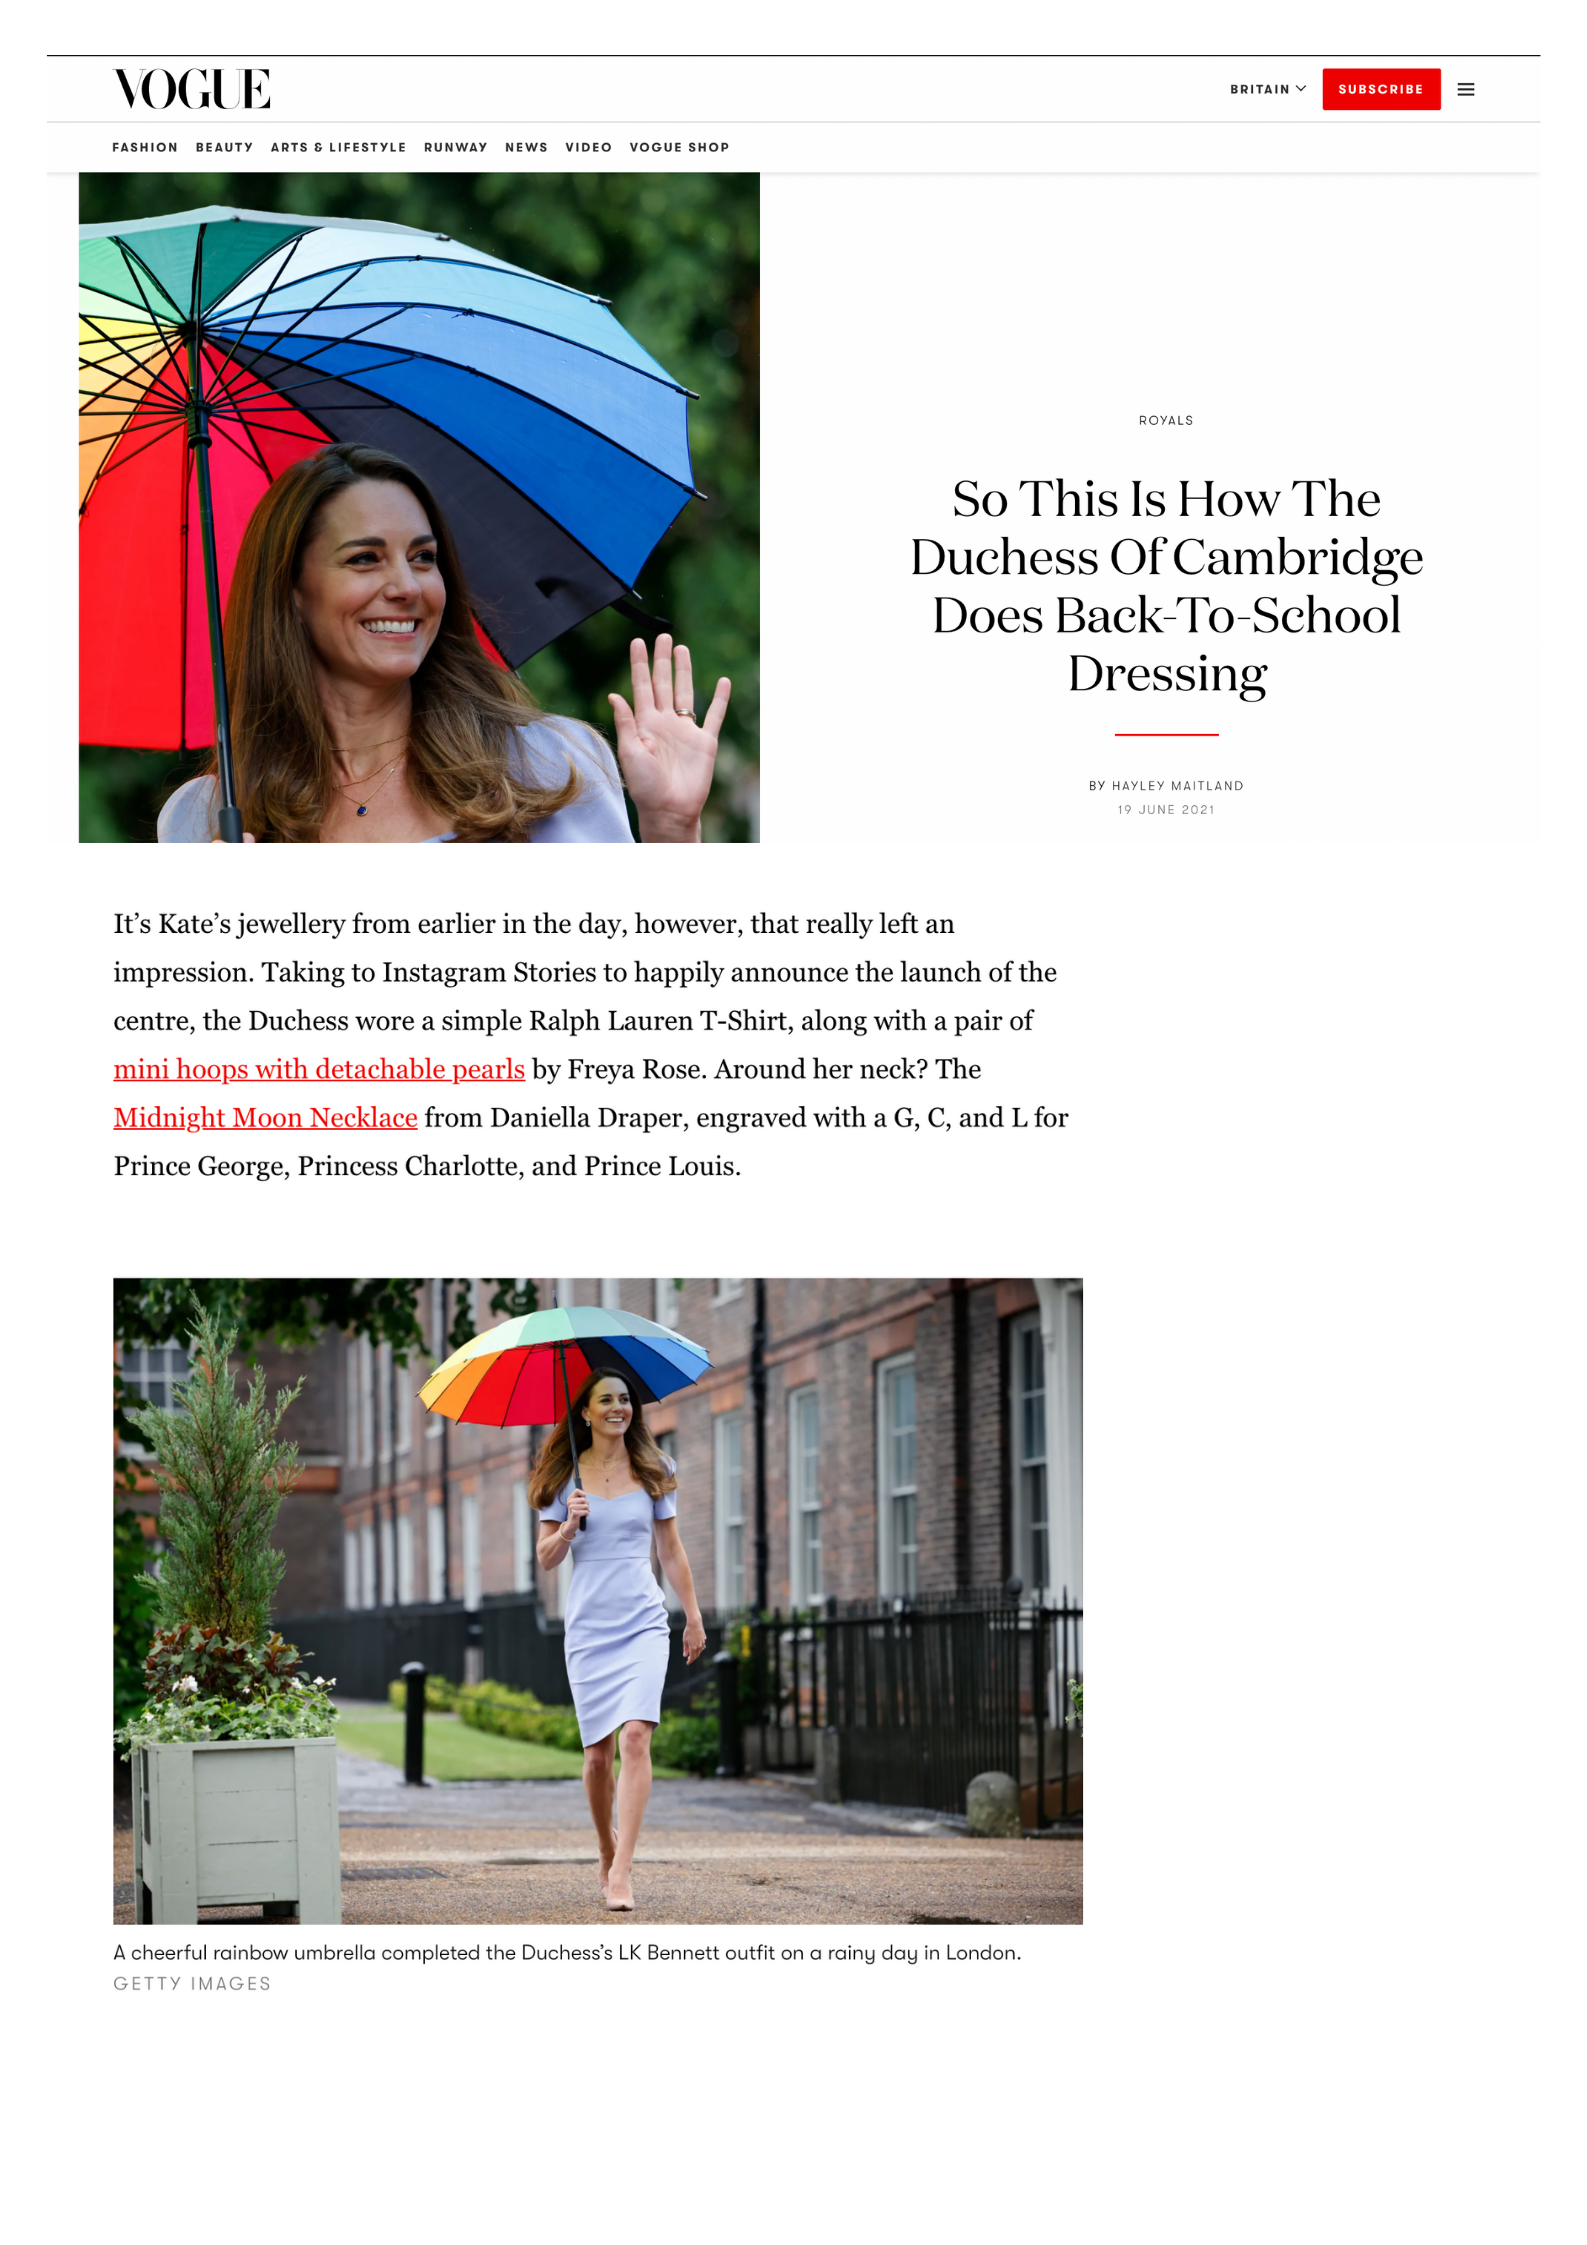 Vogue - So This Is How The Duchess Of Cambridge Does Back-To-School Dressing by Hayley Maitland